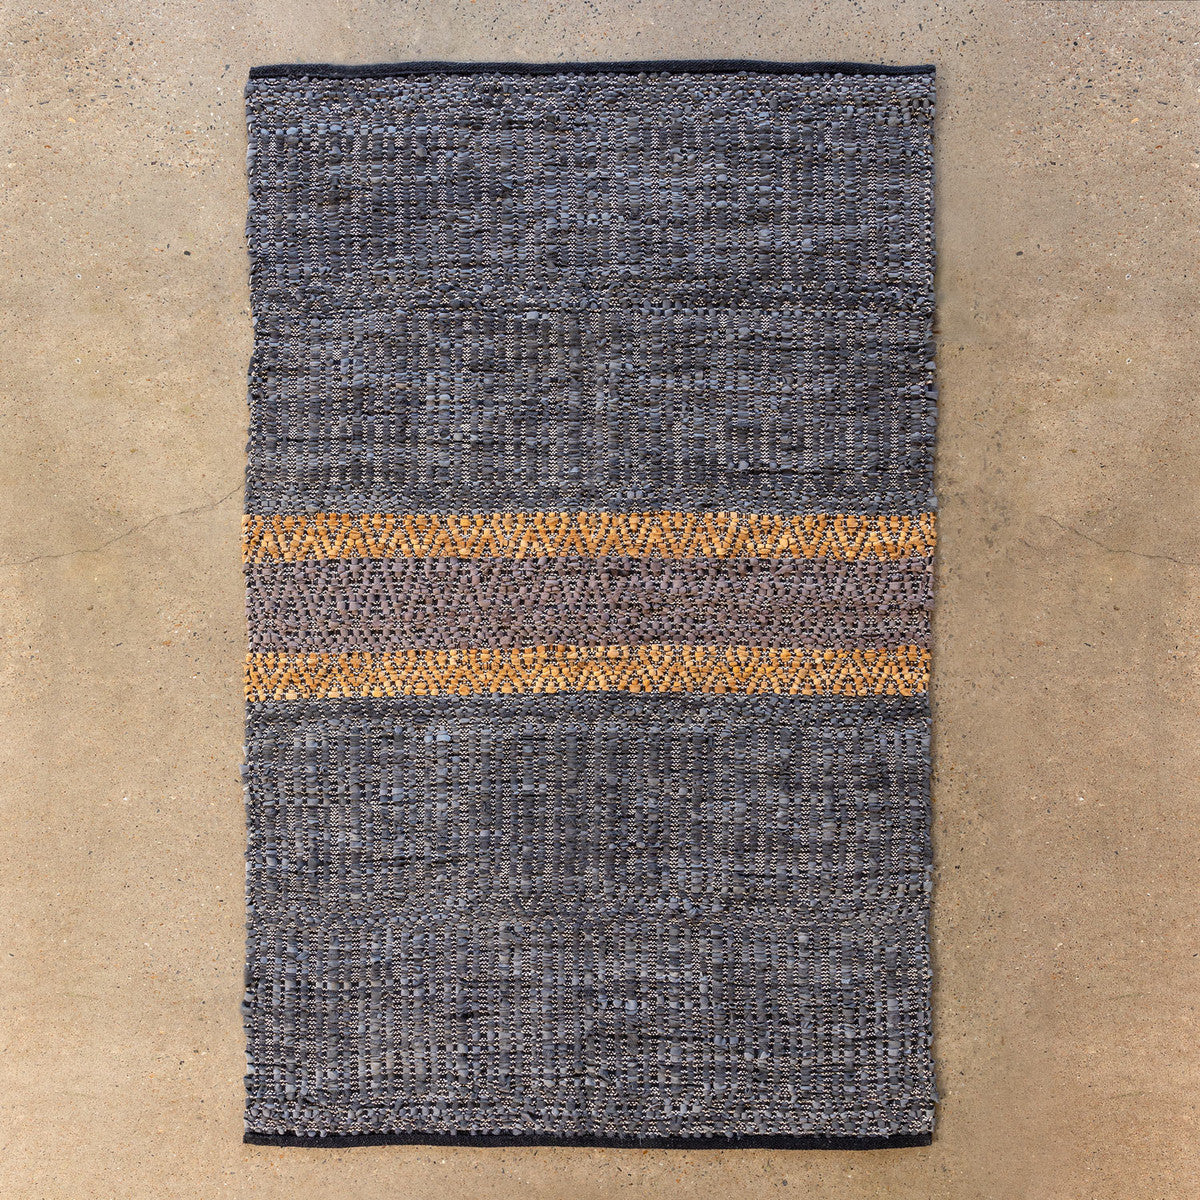 Park Hill Collection Woven Leather Stripe Rug